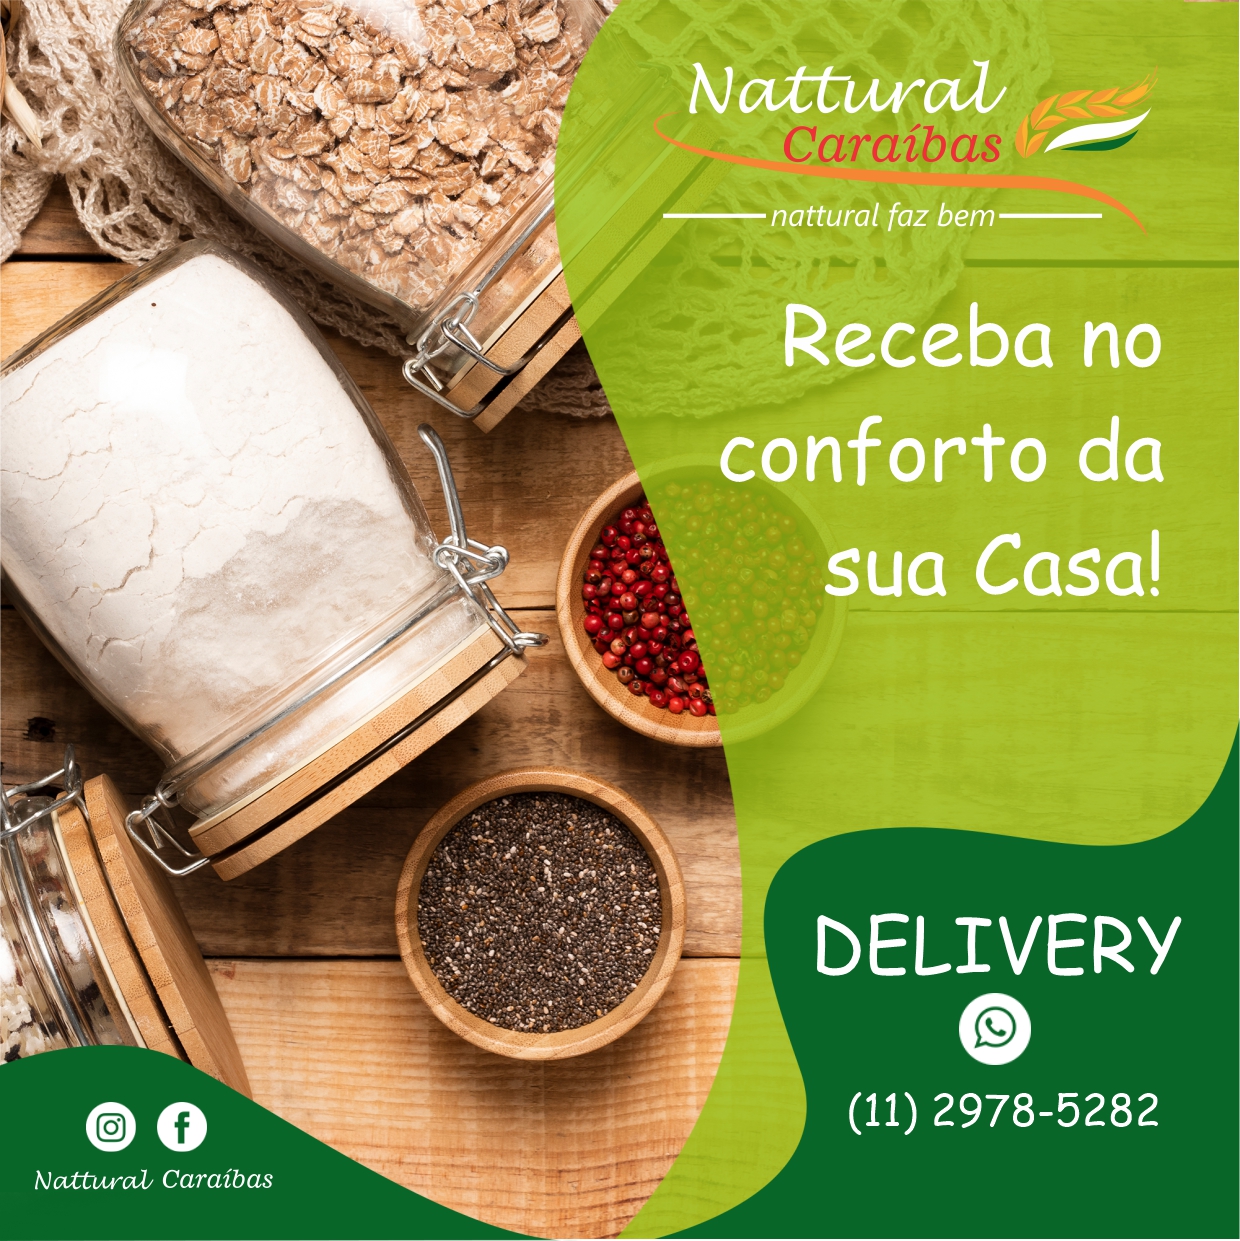 Nattural Caraibas Banners Delivery 2